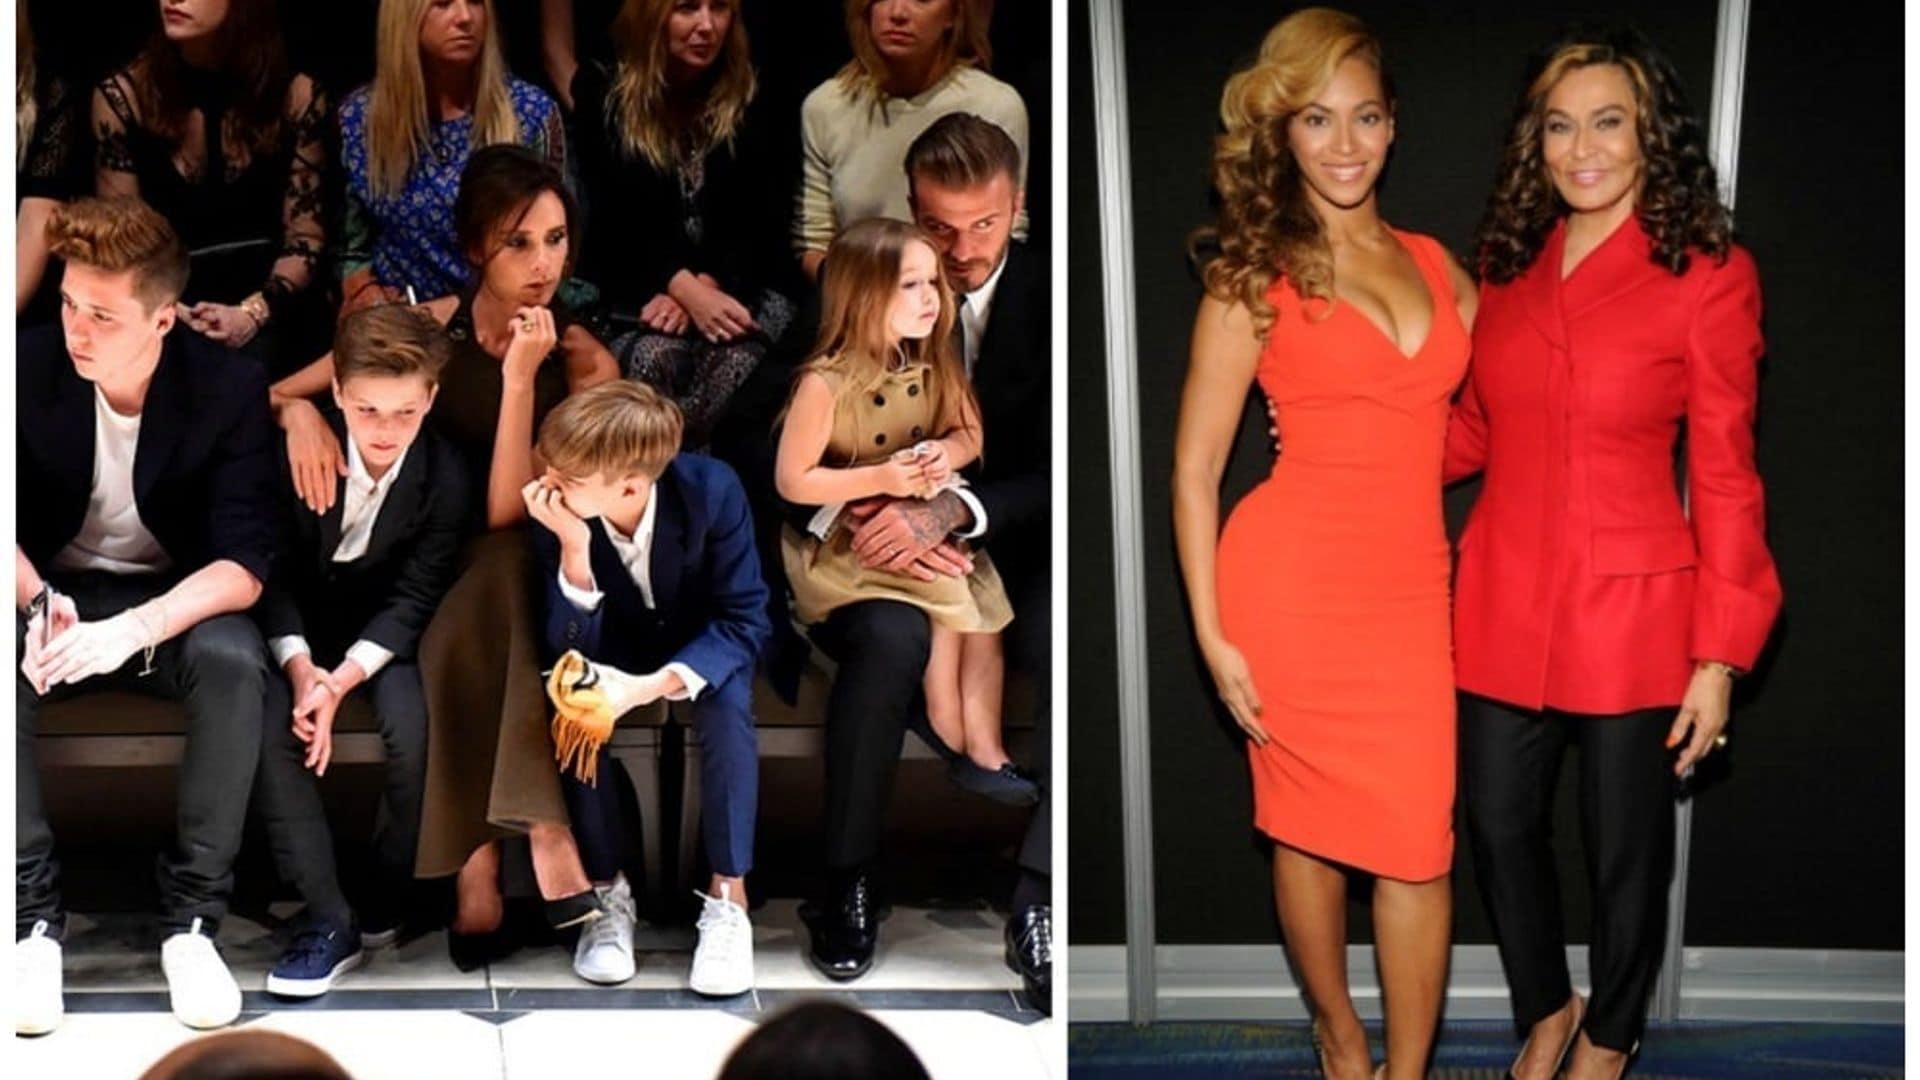 Victoria Beckham and Tina Knowles write Mother's Day letters to their kids